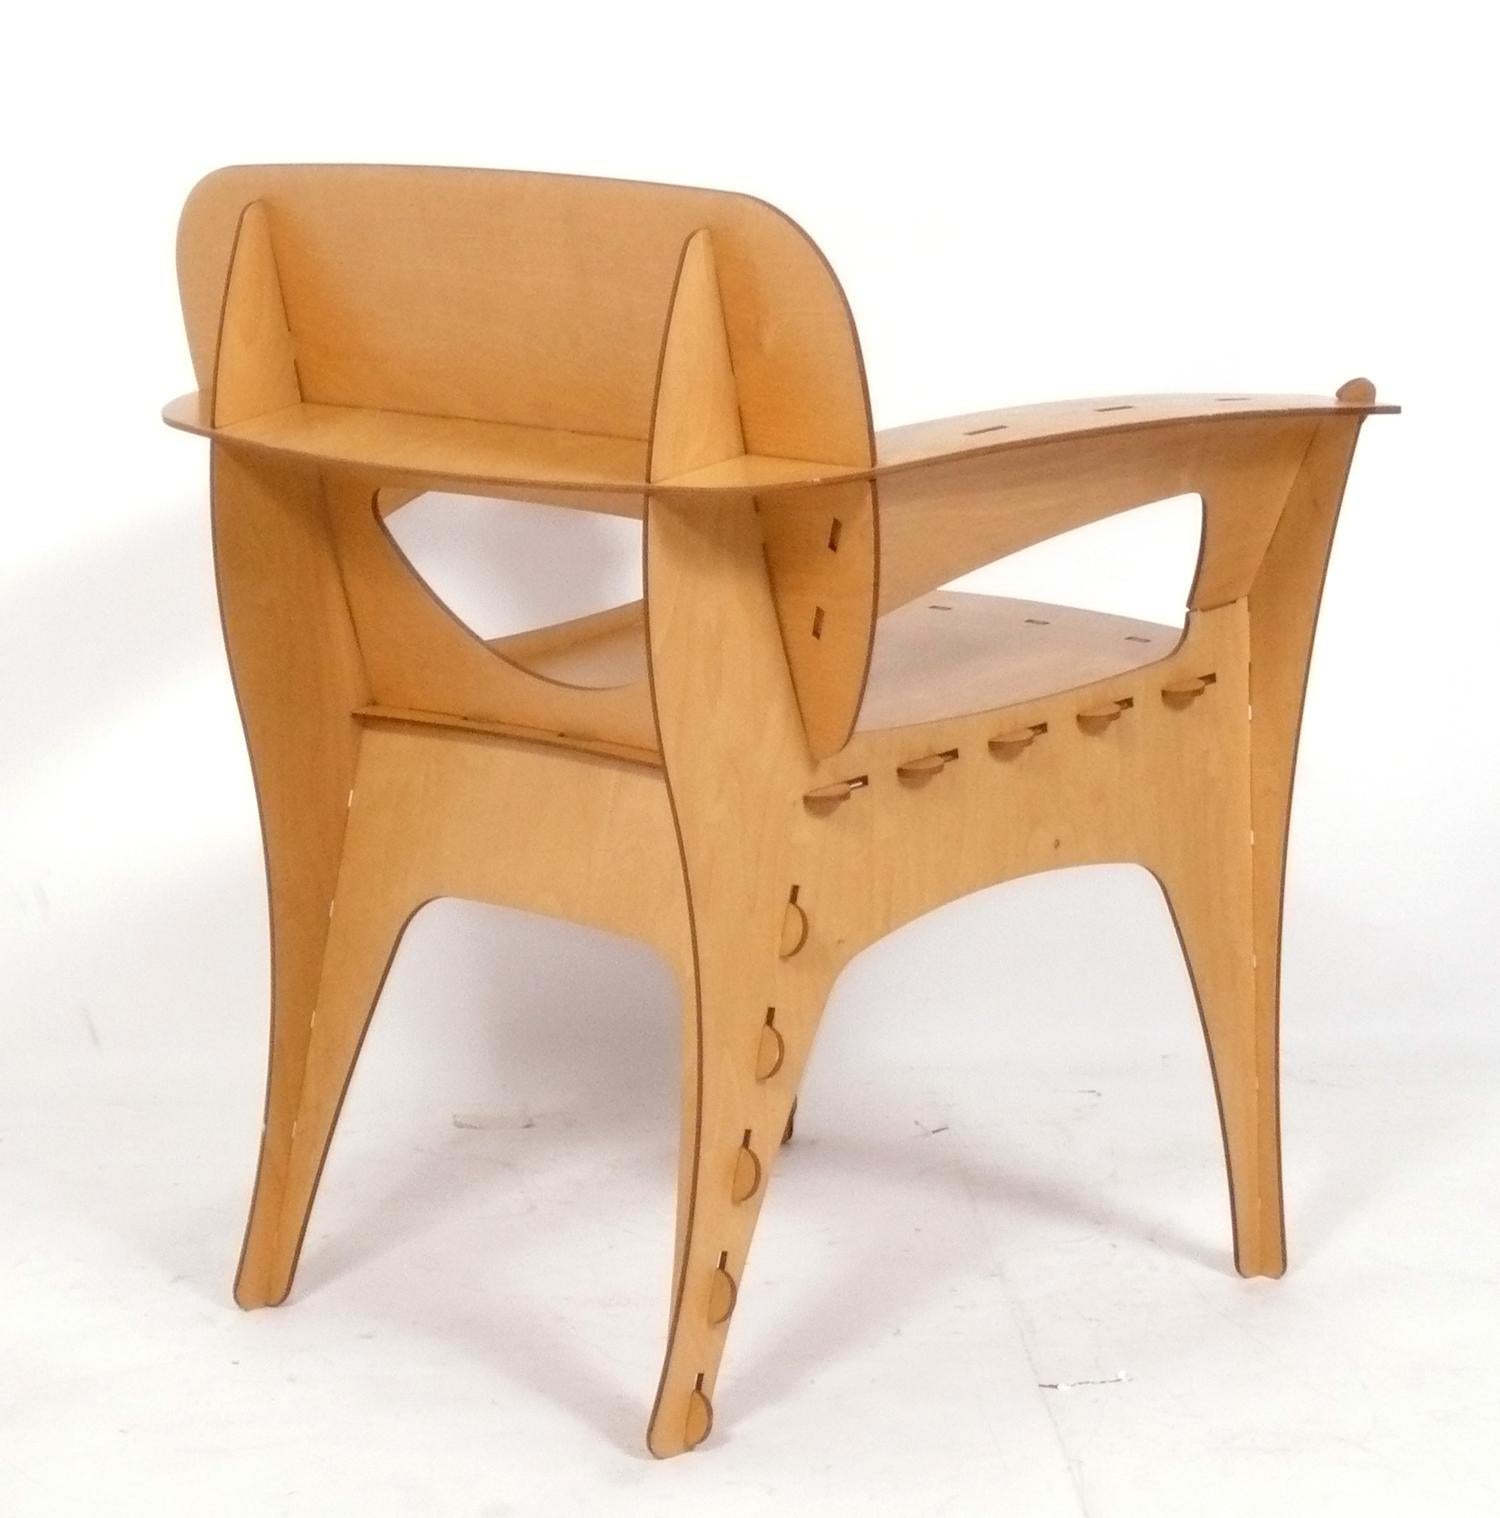 American Sculptural Plywood Puzzle Chair by David Kawecki Great Original Patina, 1990s For Sale